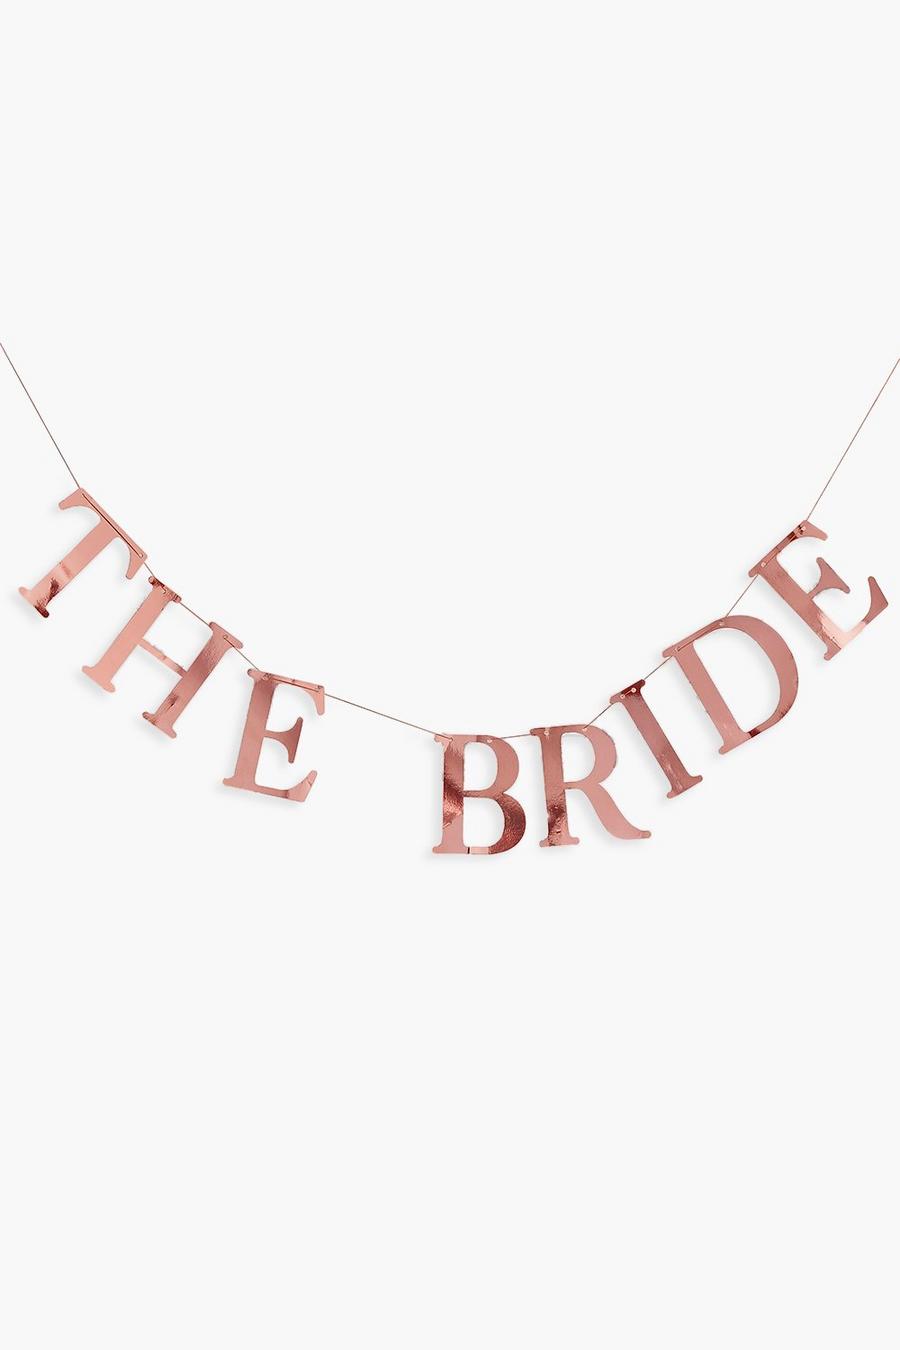 Rose gold Ginger Ray The Bride Peg Bunting image number 1